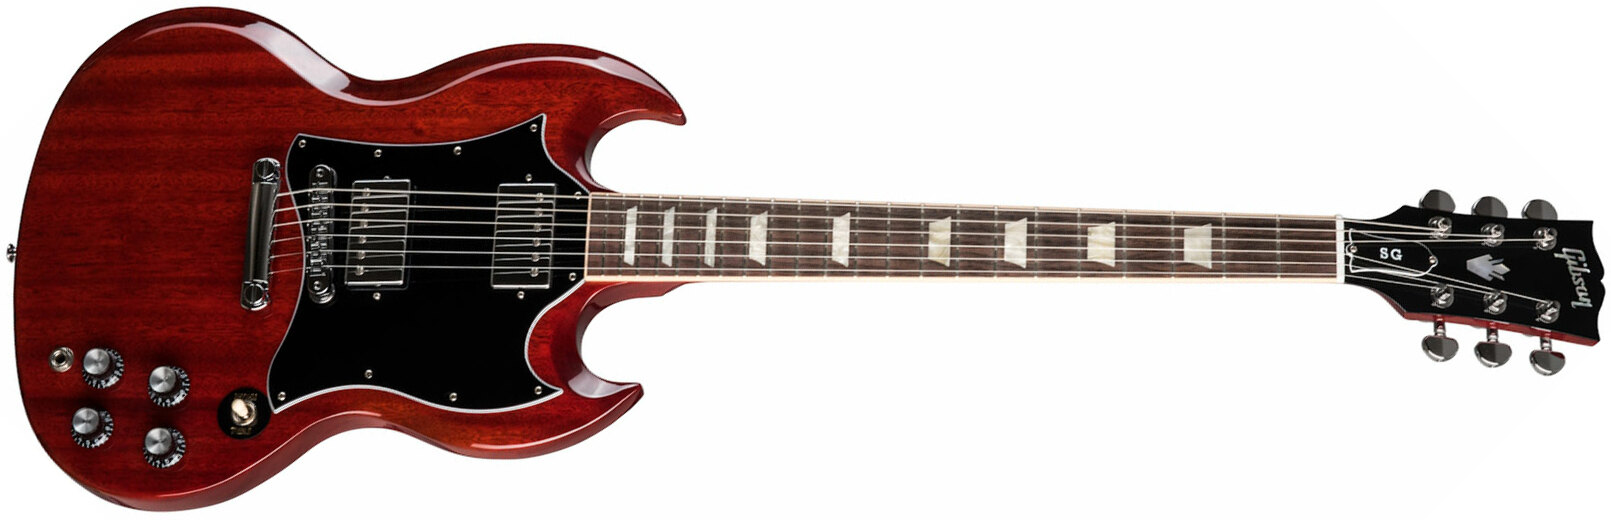 Gibson Sg Standard 2h Ht Rw - Heritage Cherry - Double cut electric guitar - Main picture